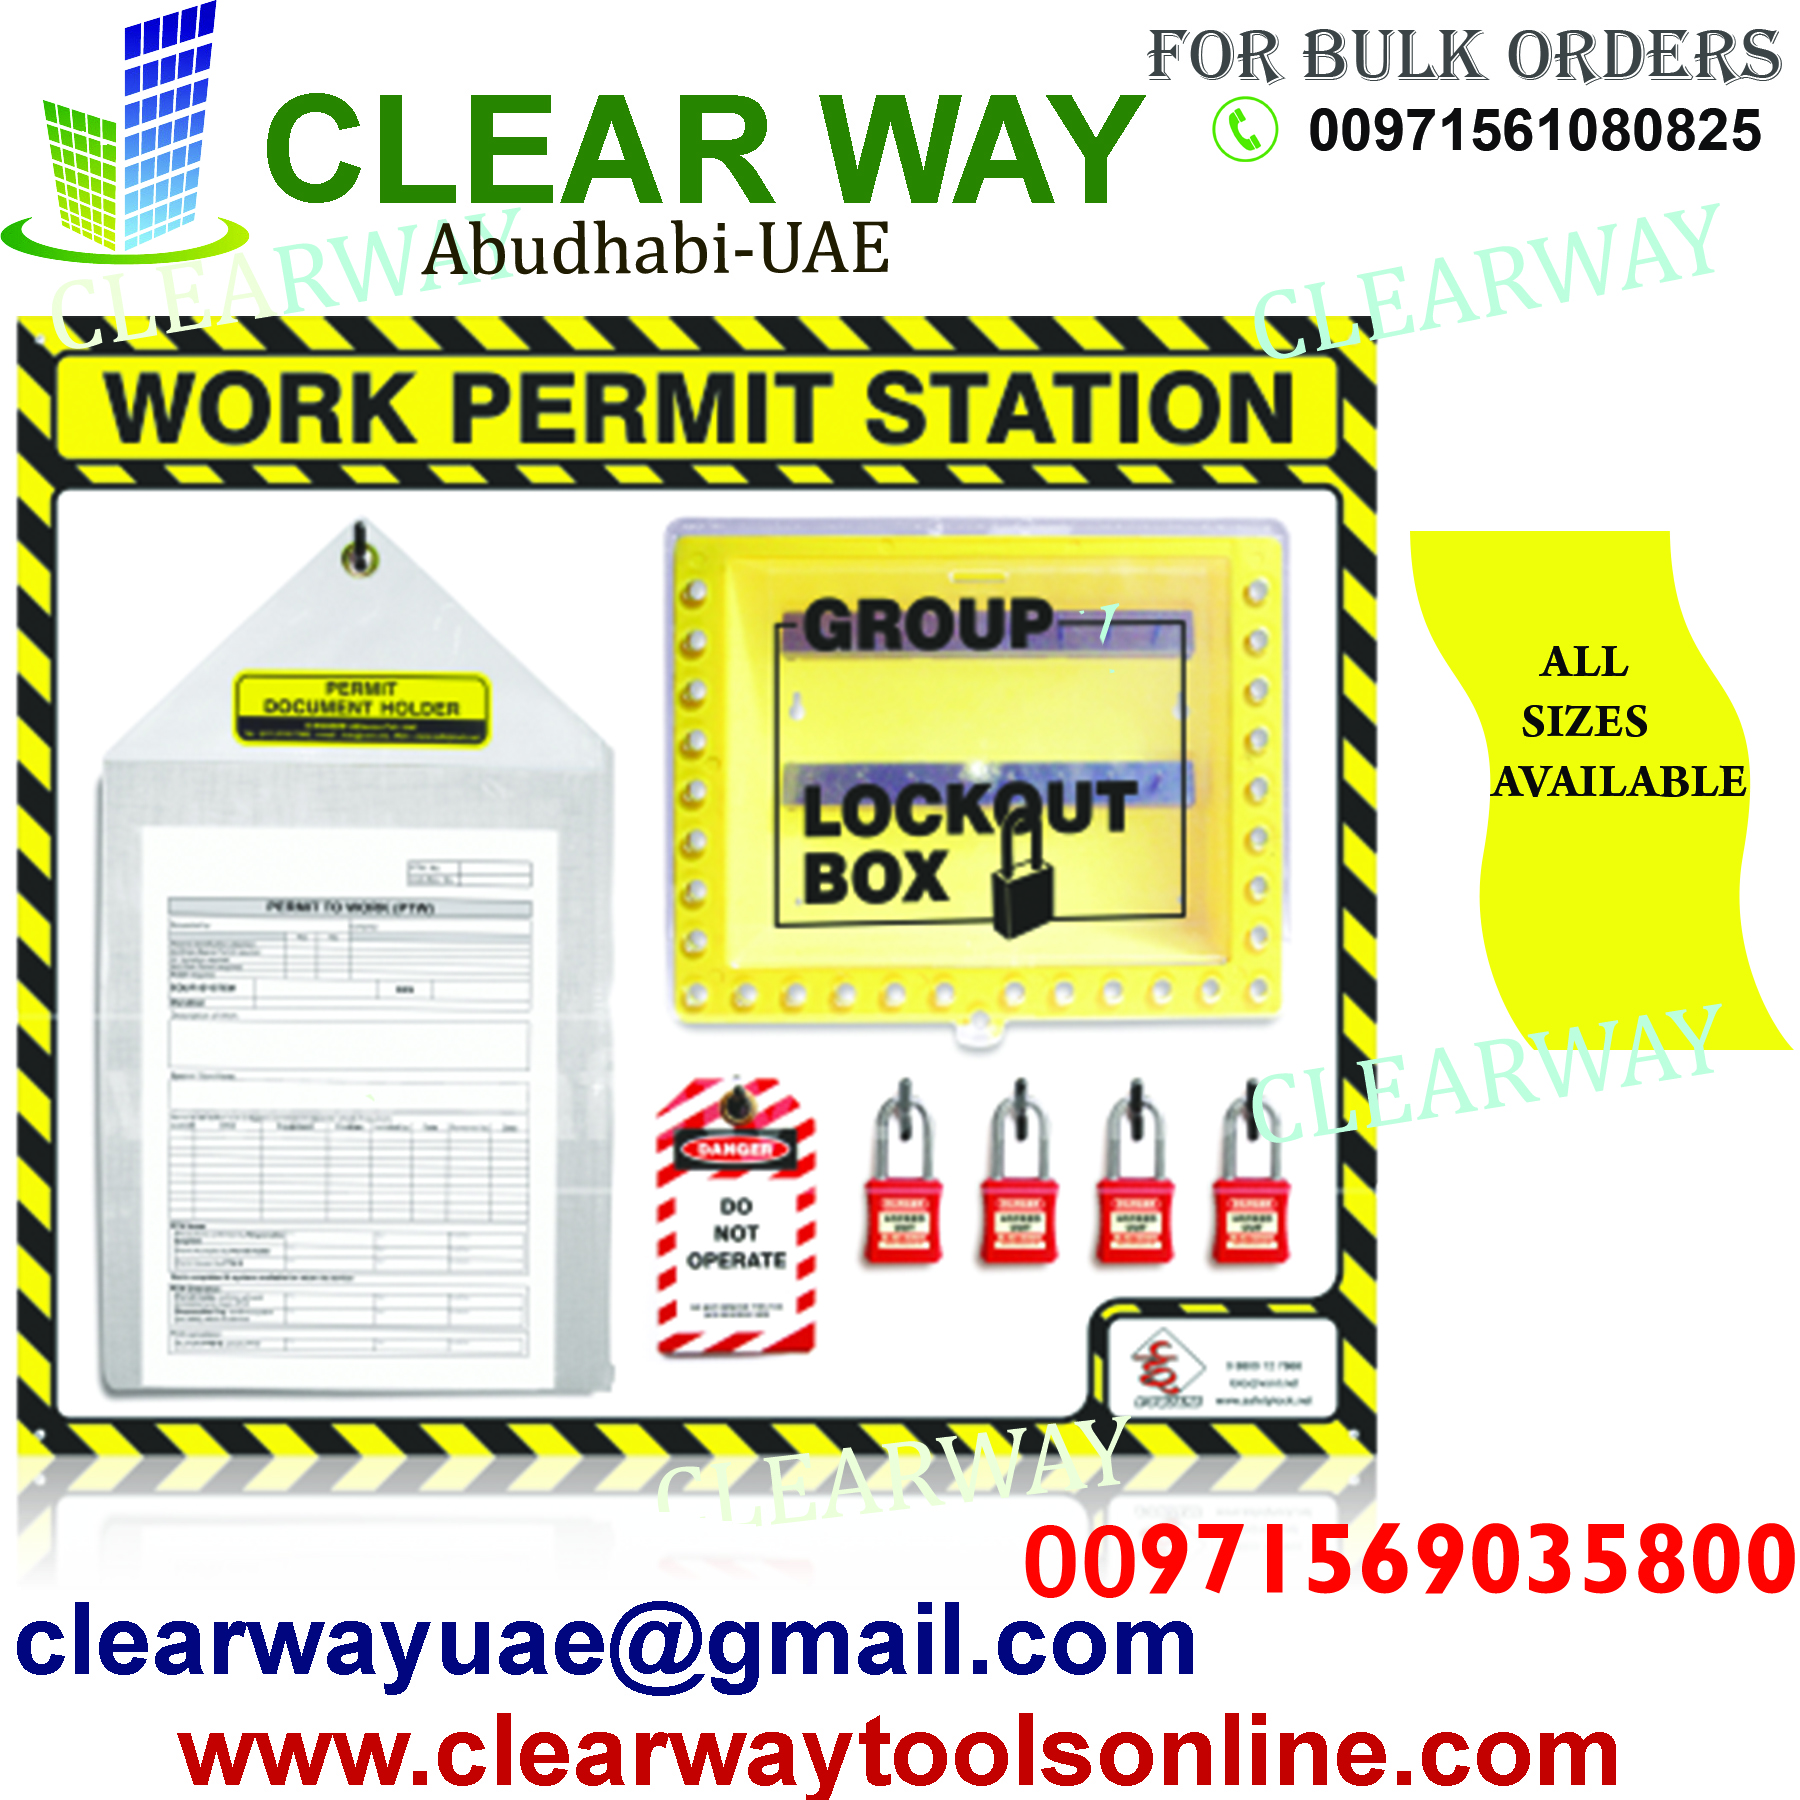 WORK PERMIT STAION DEALER IN MUSSAFAH , ABUDHABI , UAE BY CLEARWAY